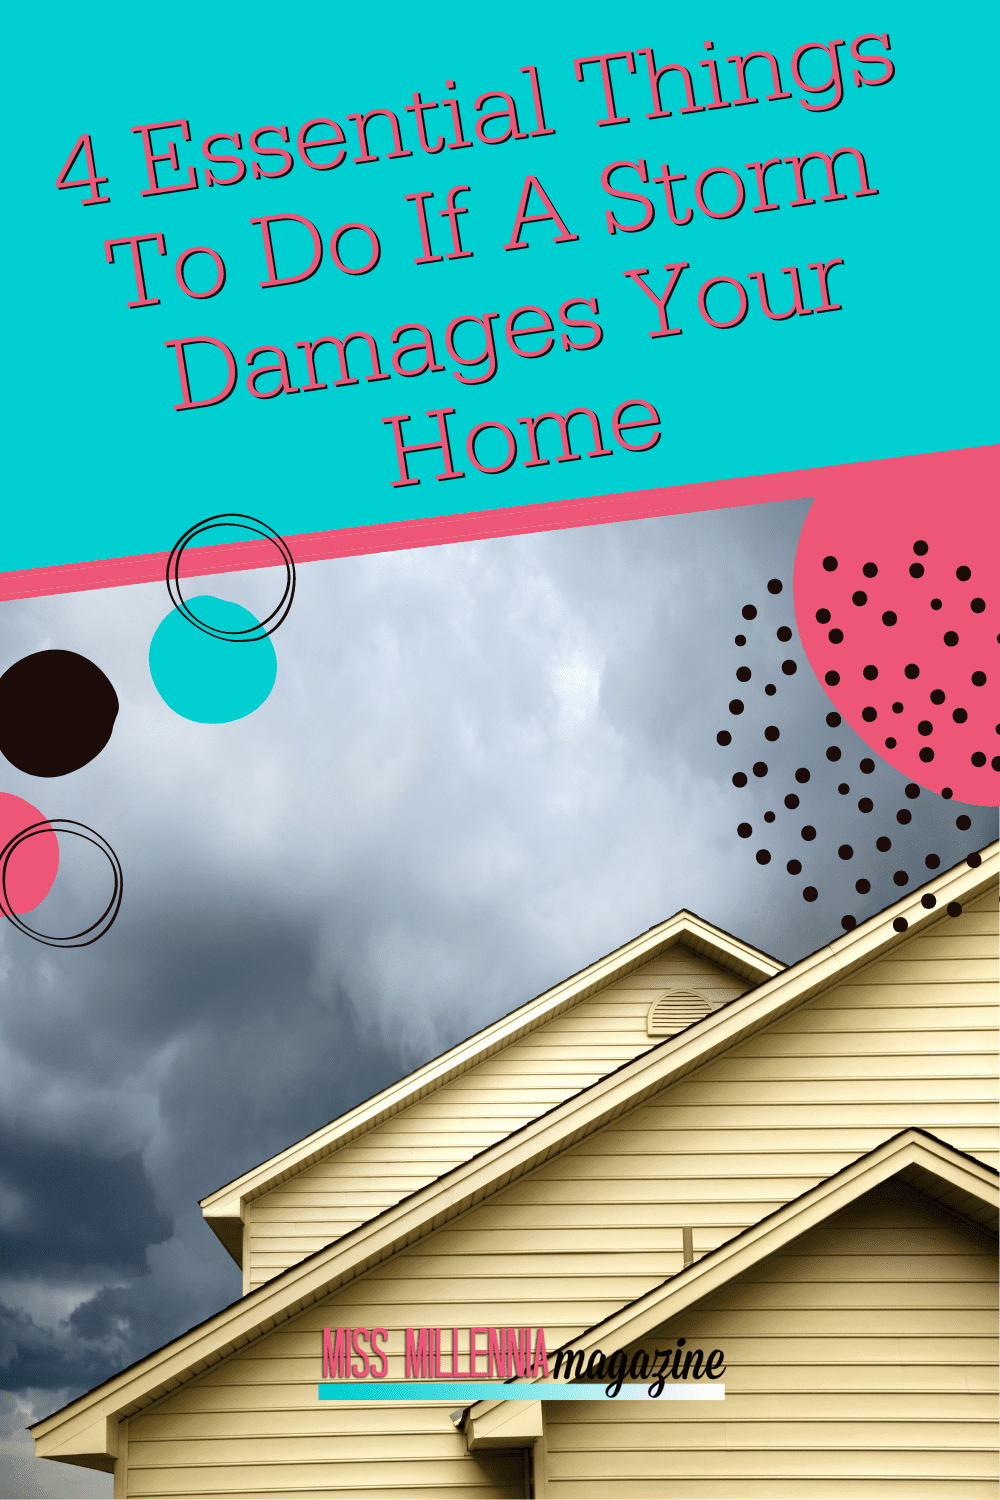 4 Essential Things To Do If A Storm Damages Your Home